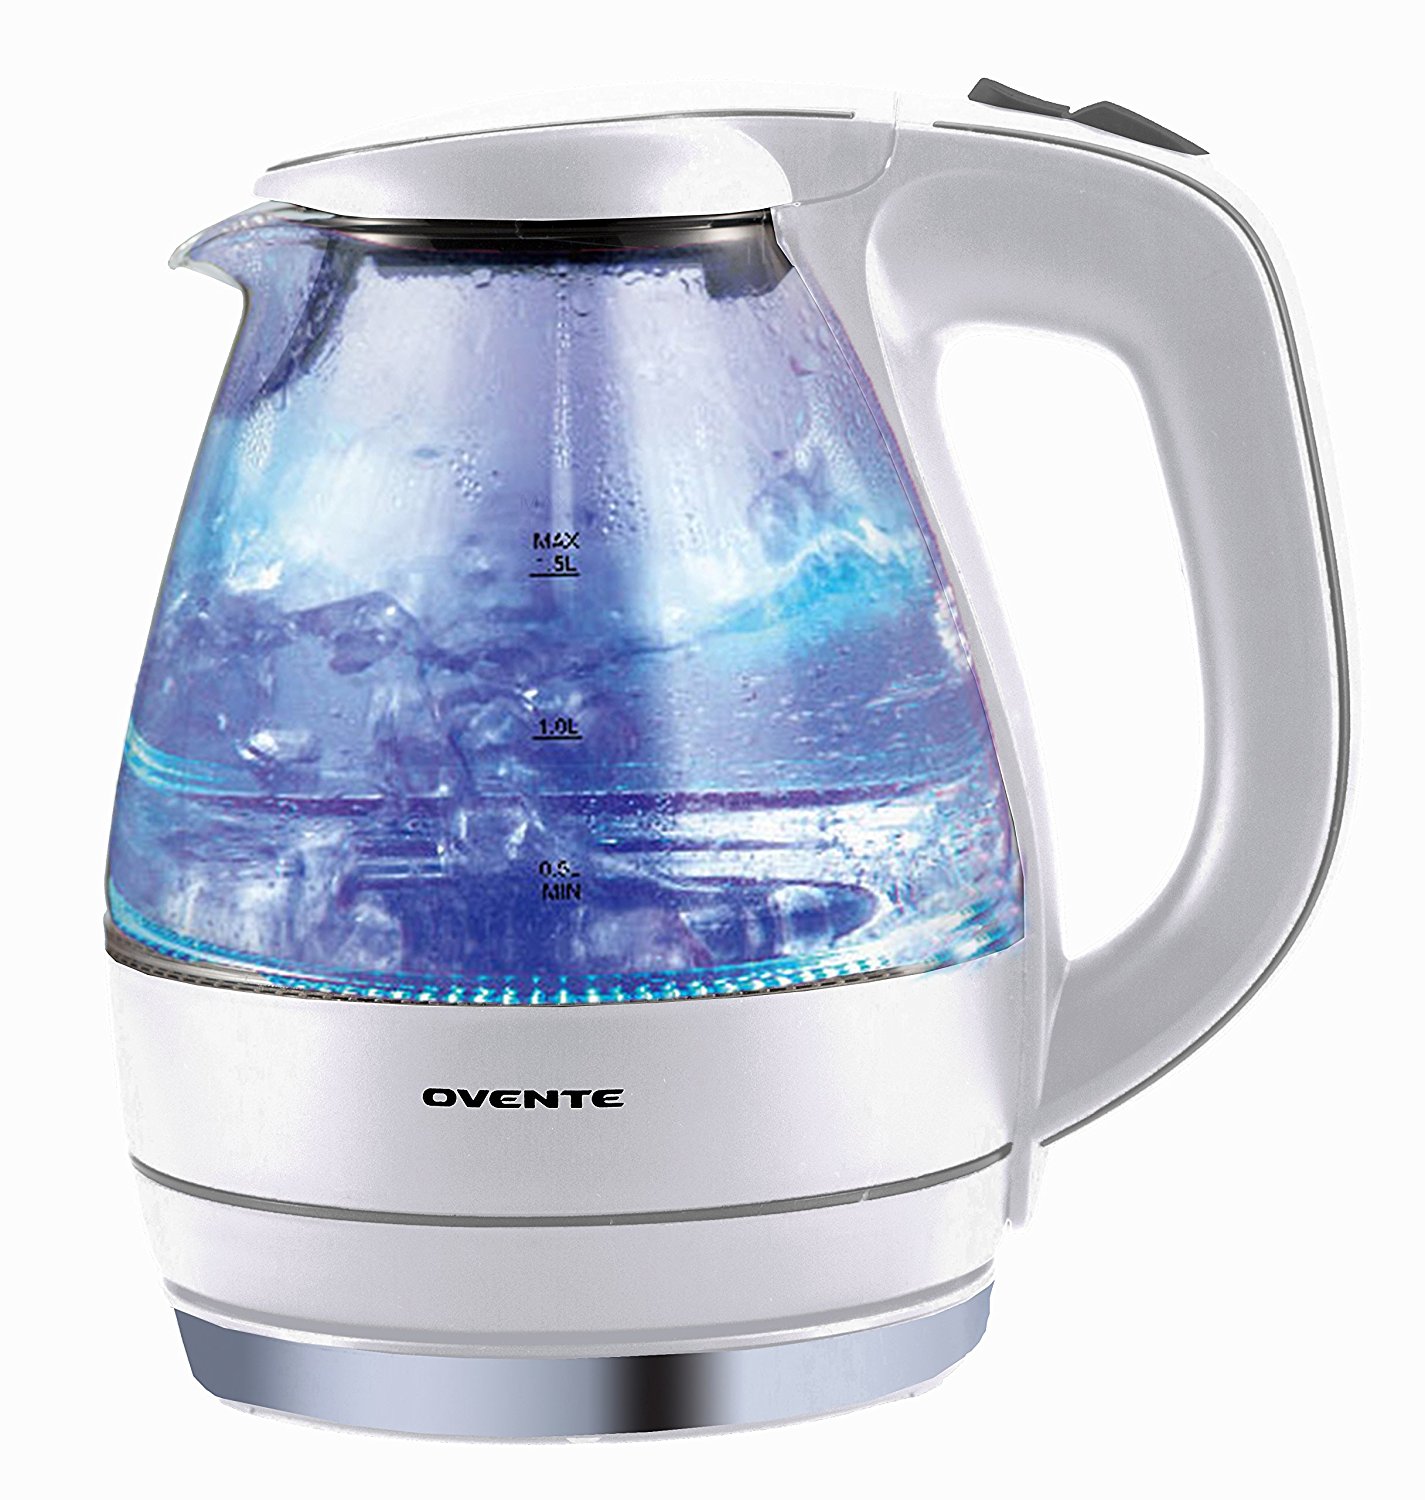 Amazon.com: Ovente 1.5L BPA-Free Glass Electric Kettle, Fast Heating ...